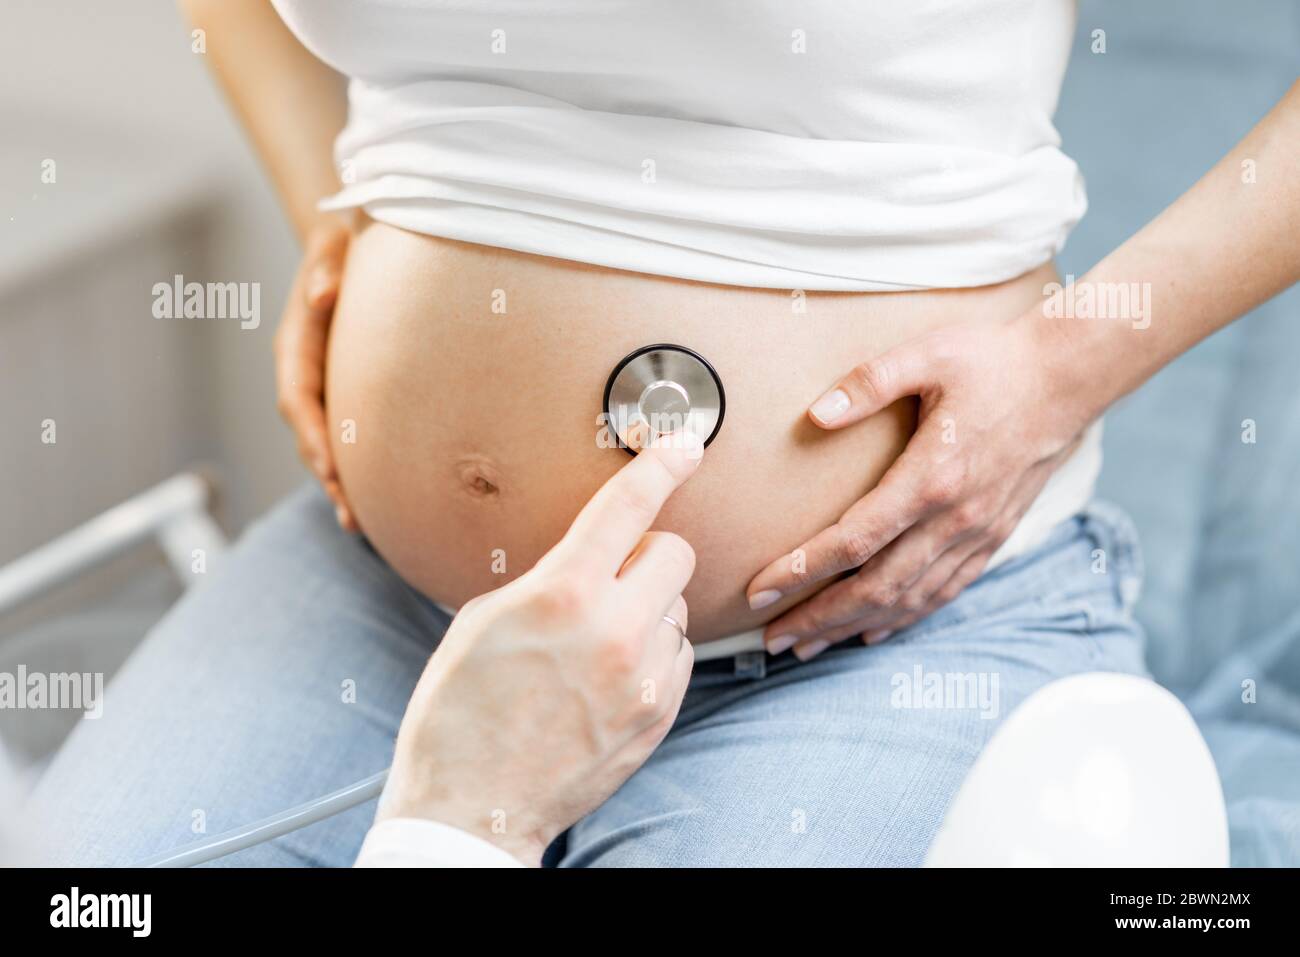 Doctor listening to a pregnant woman's belly with a stethoscope during a  medical examination, close-up view Stock Photo - Alamy